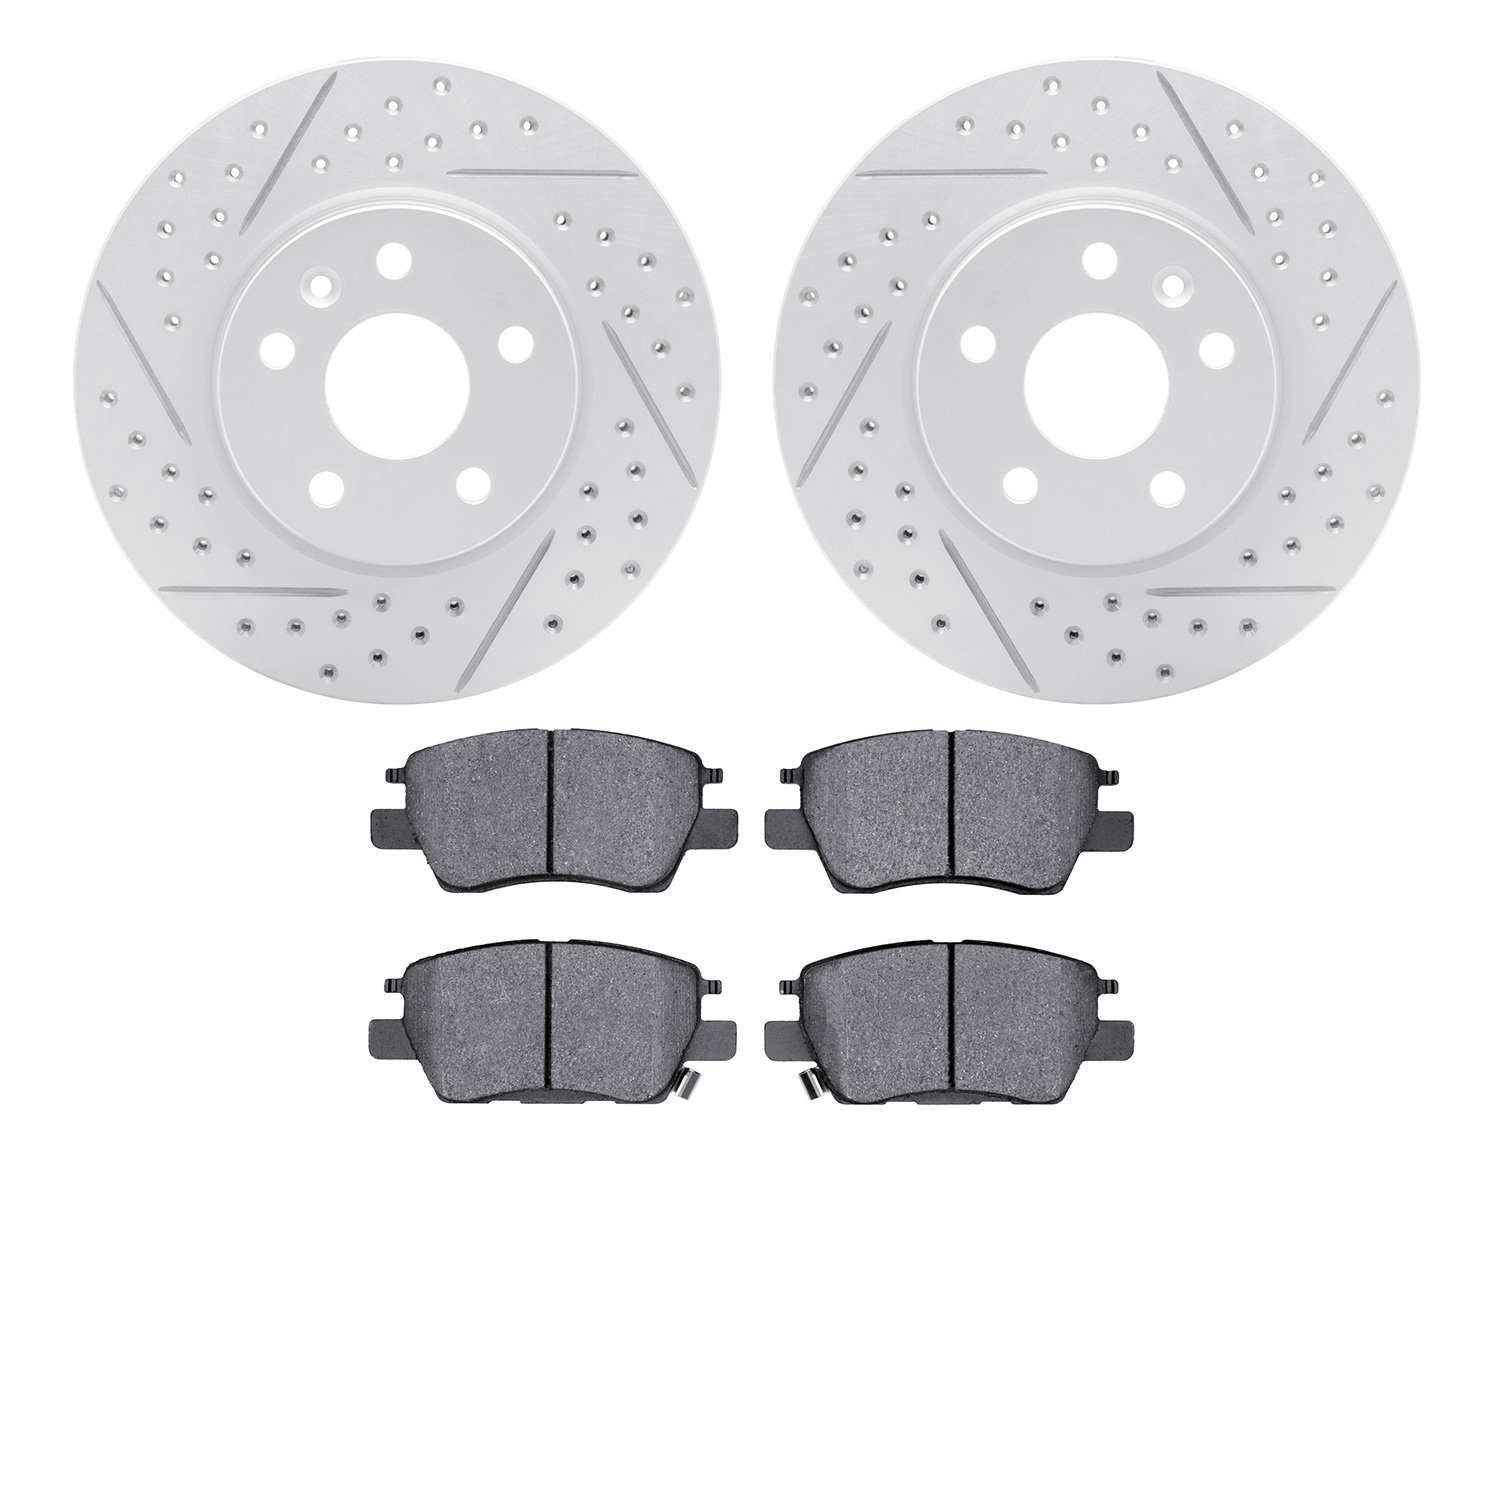 2502-47032 Geoperformance Drilled/Slotted Rotors w/5000 Advanced Brake Pads Kit, Fits Select GM, Position: Front